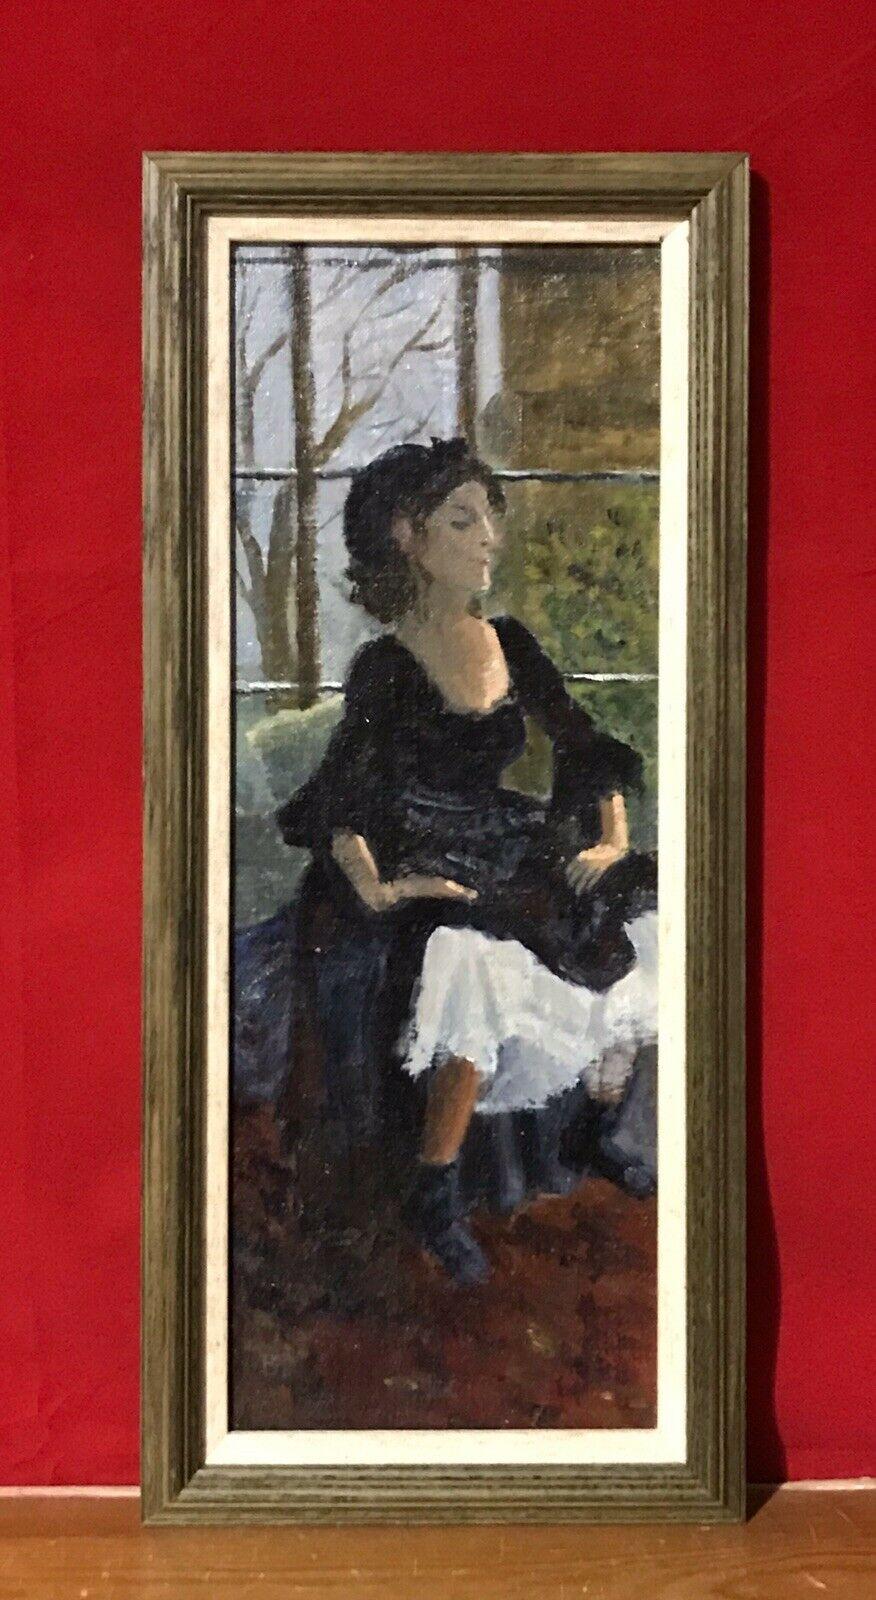 ENGLISH IMPRESSIONIST OIL - LADY IN OLD FASHIONED DRESS SEATED IN WINDOW SILL - Abstract Painting by Unknown